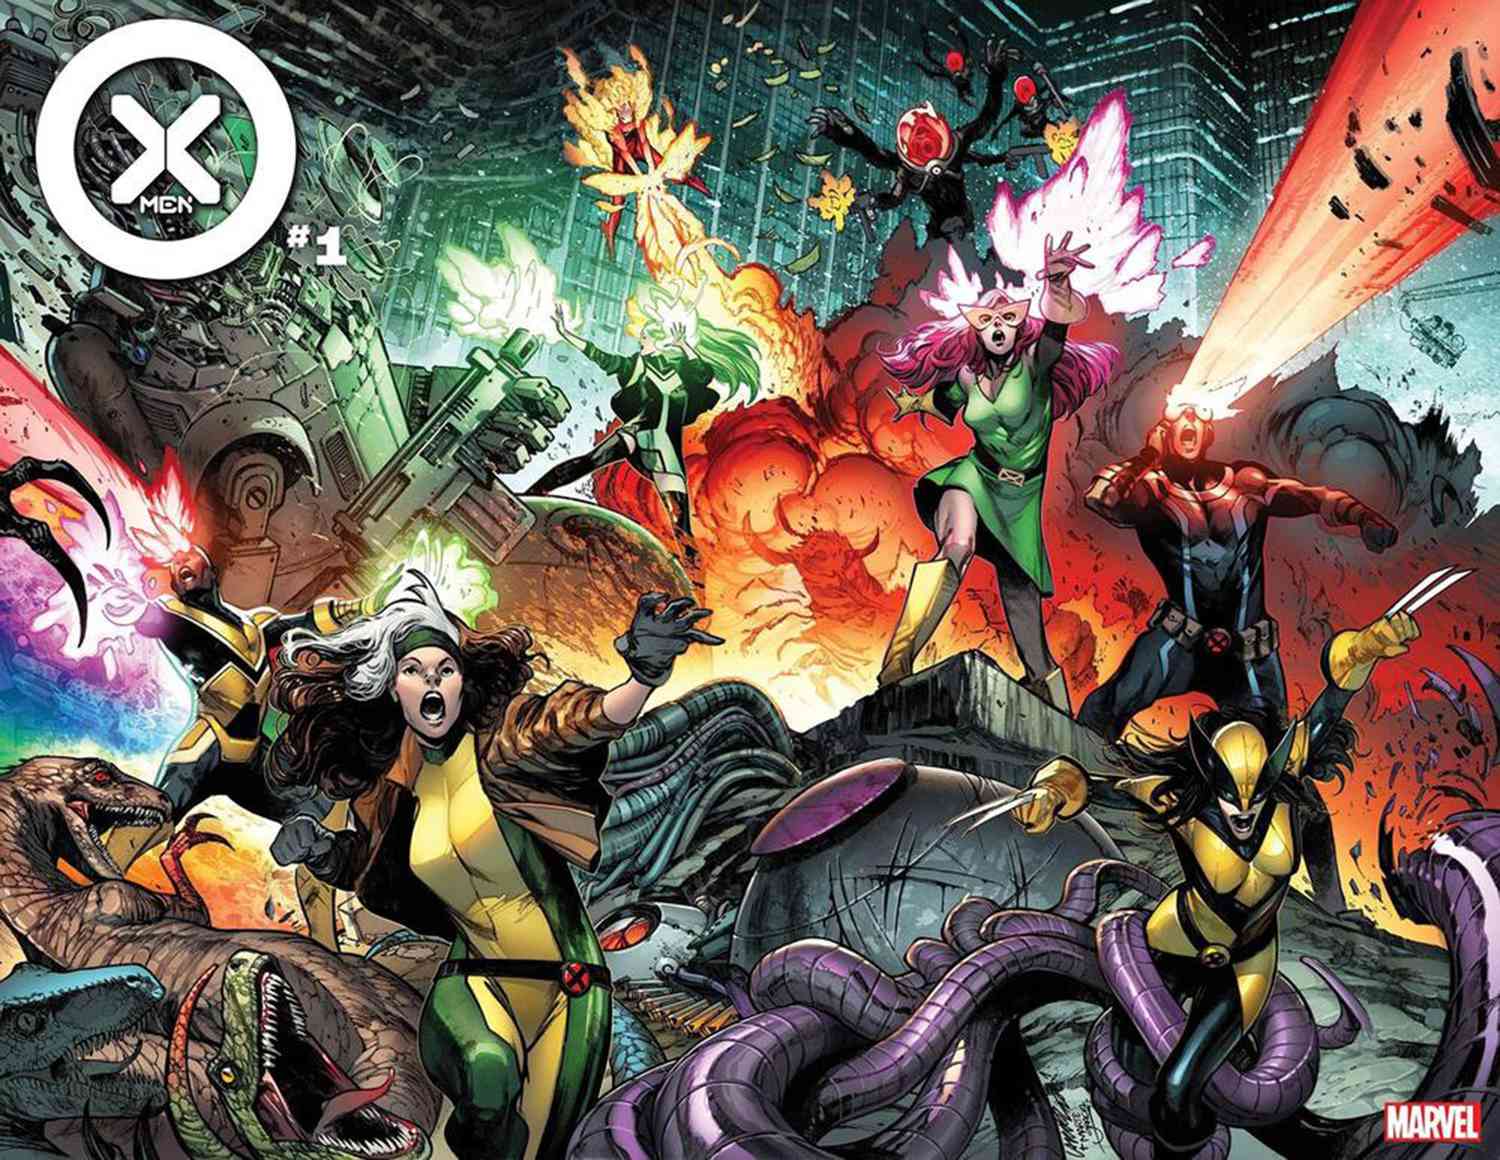 The cover of 'X-Men' #1, by Gerry Duggan and Pepe Larraz